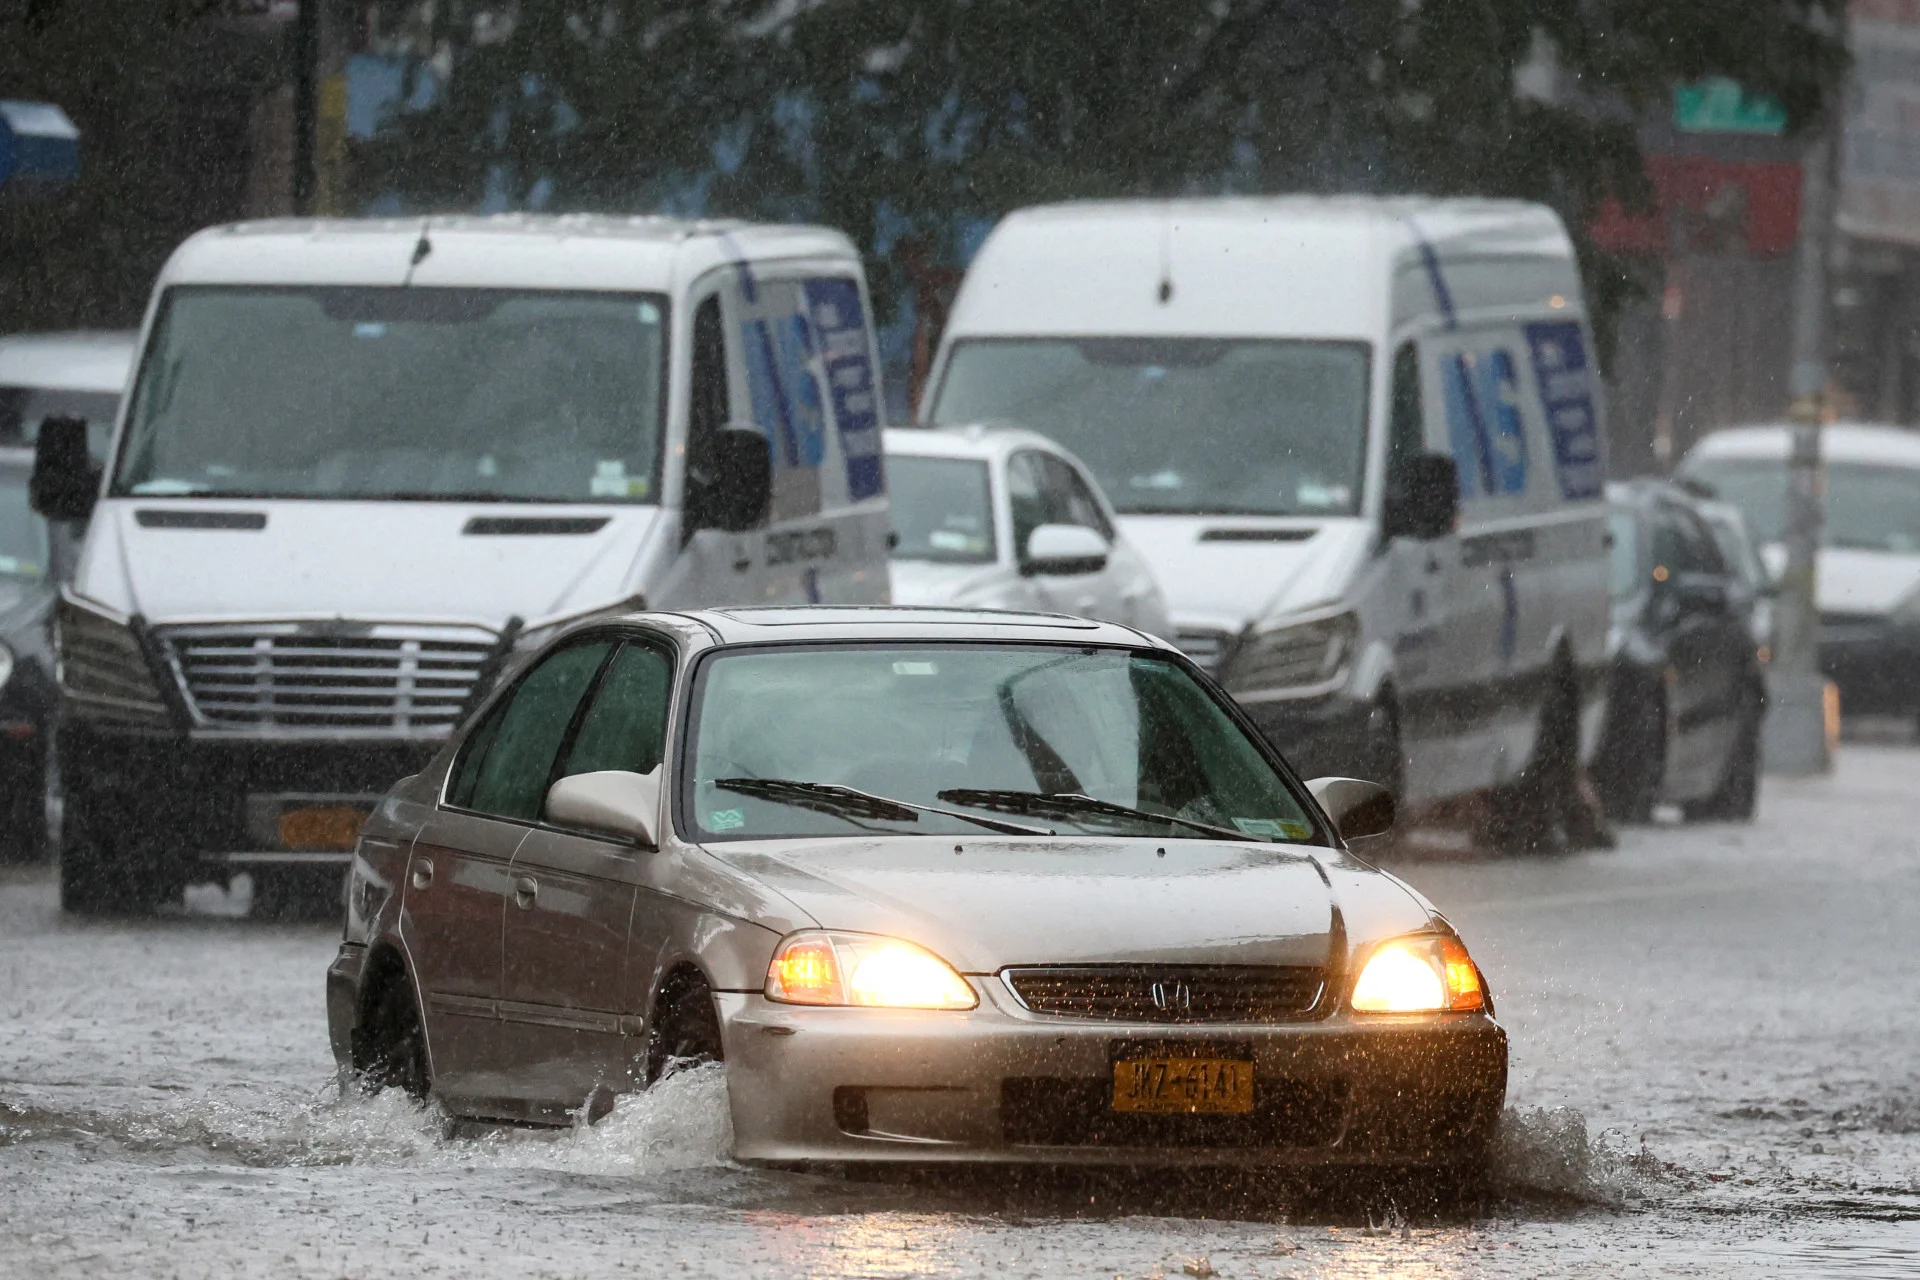 Reuters:  Source: Reuters Traffic is seen on a flooded street, as the remnants of Tropical Storm Ophelia bring flooding across mid-Atlantic and Northeast, in the Brooklyn borough of New York City, U.S., September 29, 2023. REUTERS/Brendan McDermid